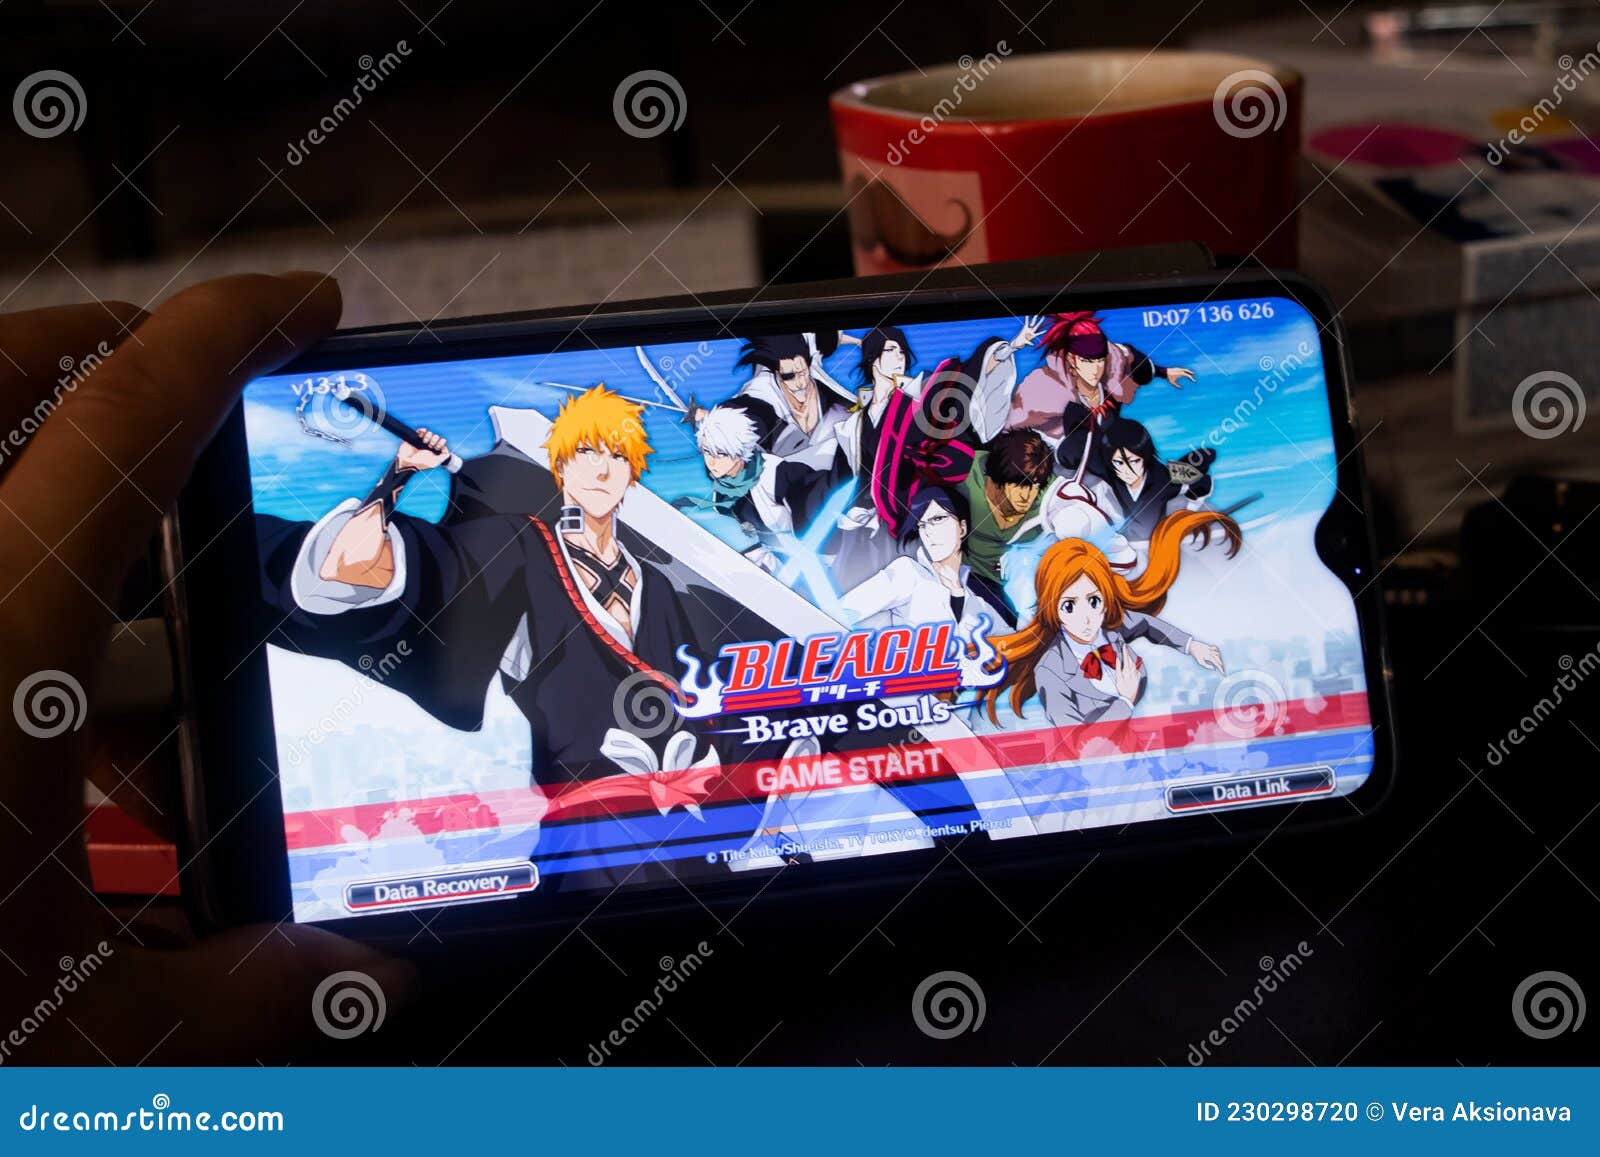 110 Bleach Anime Royalty-Free Images, Stock Photos & Pictures